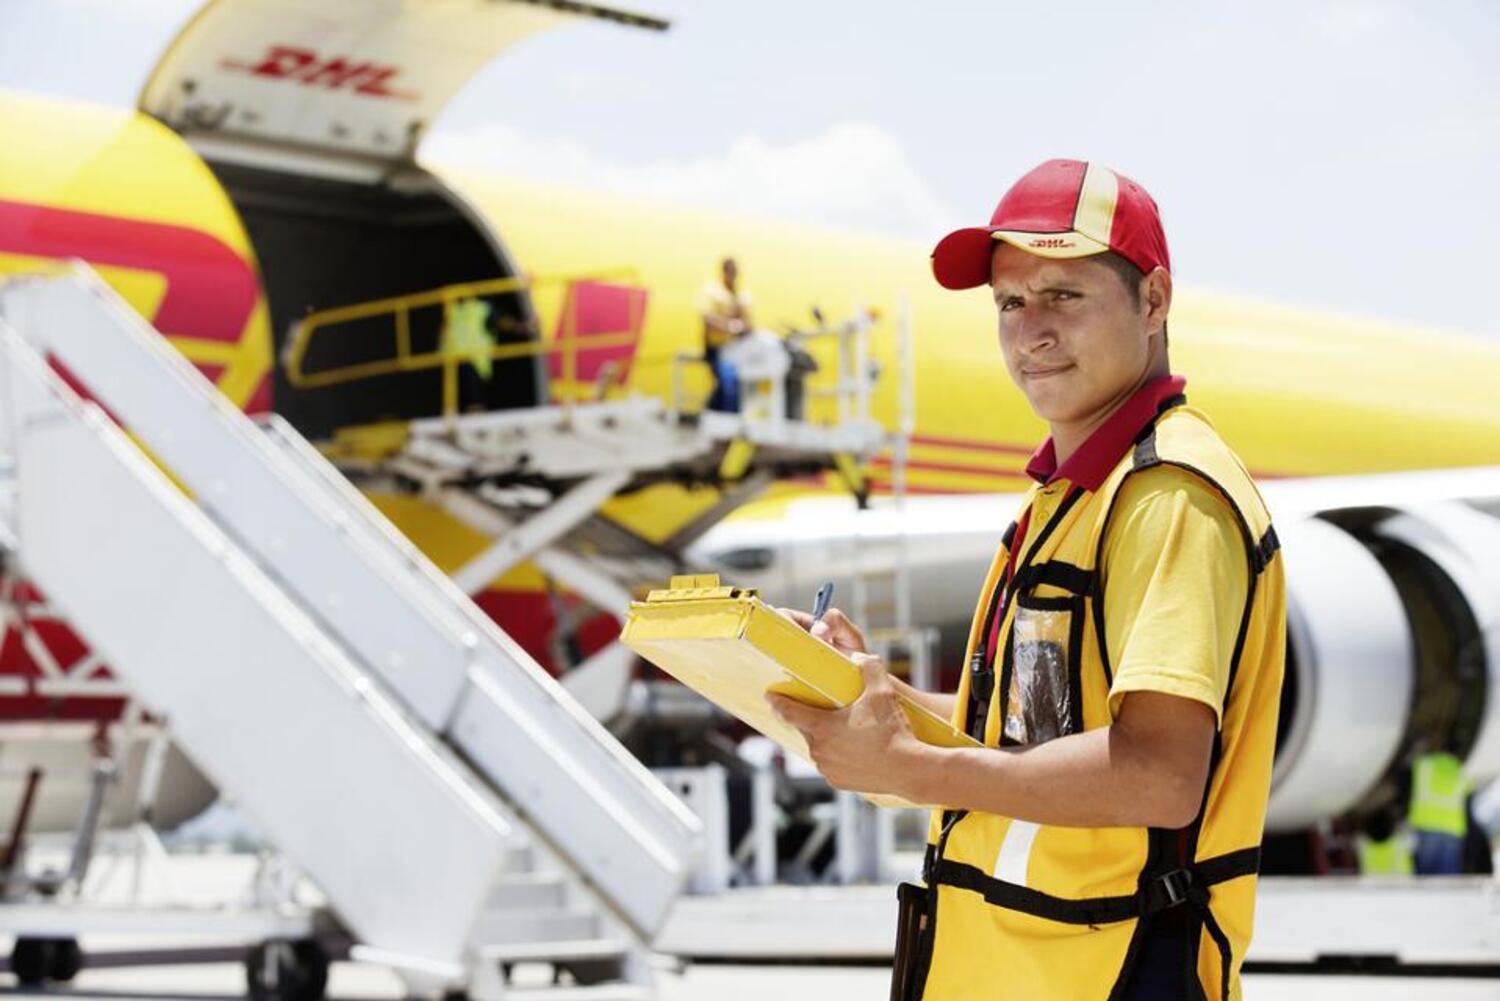  DHL’s Radically Simple Approach to Employee Training